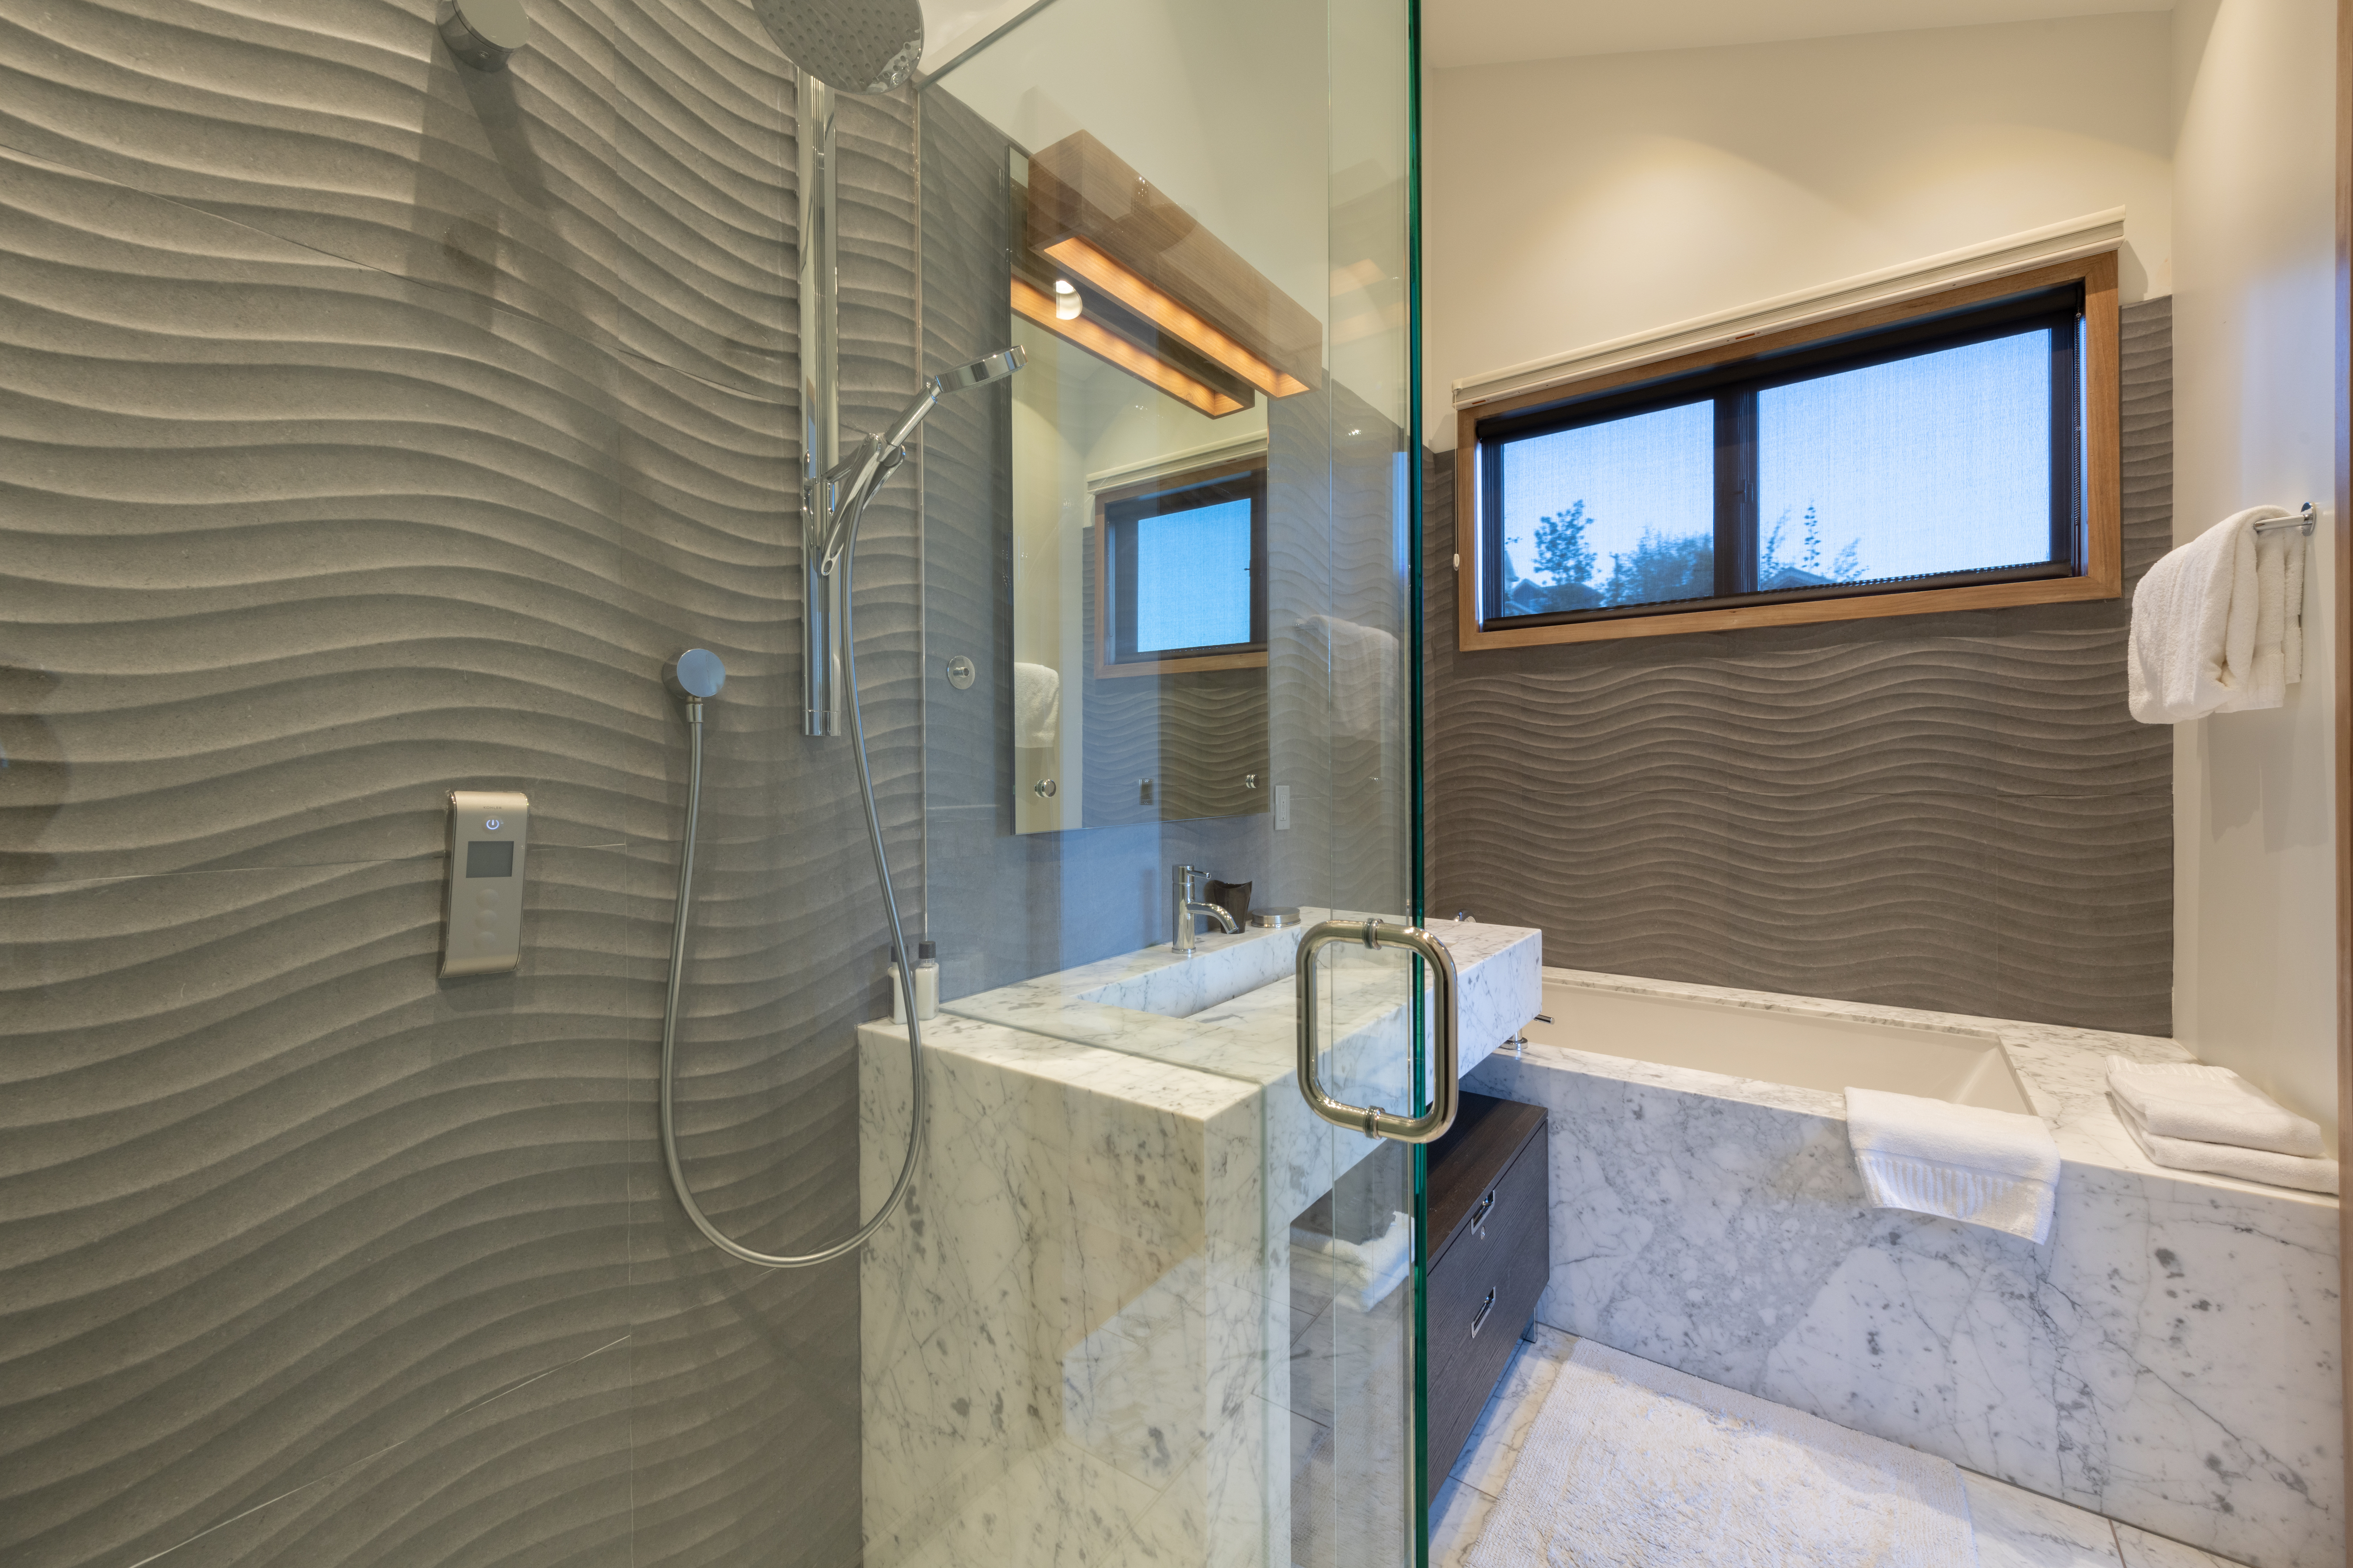 Luxurious master bath with stand-alone shower and over-sized soaking tub